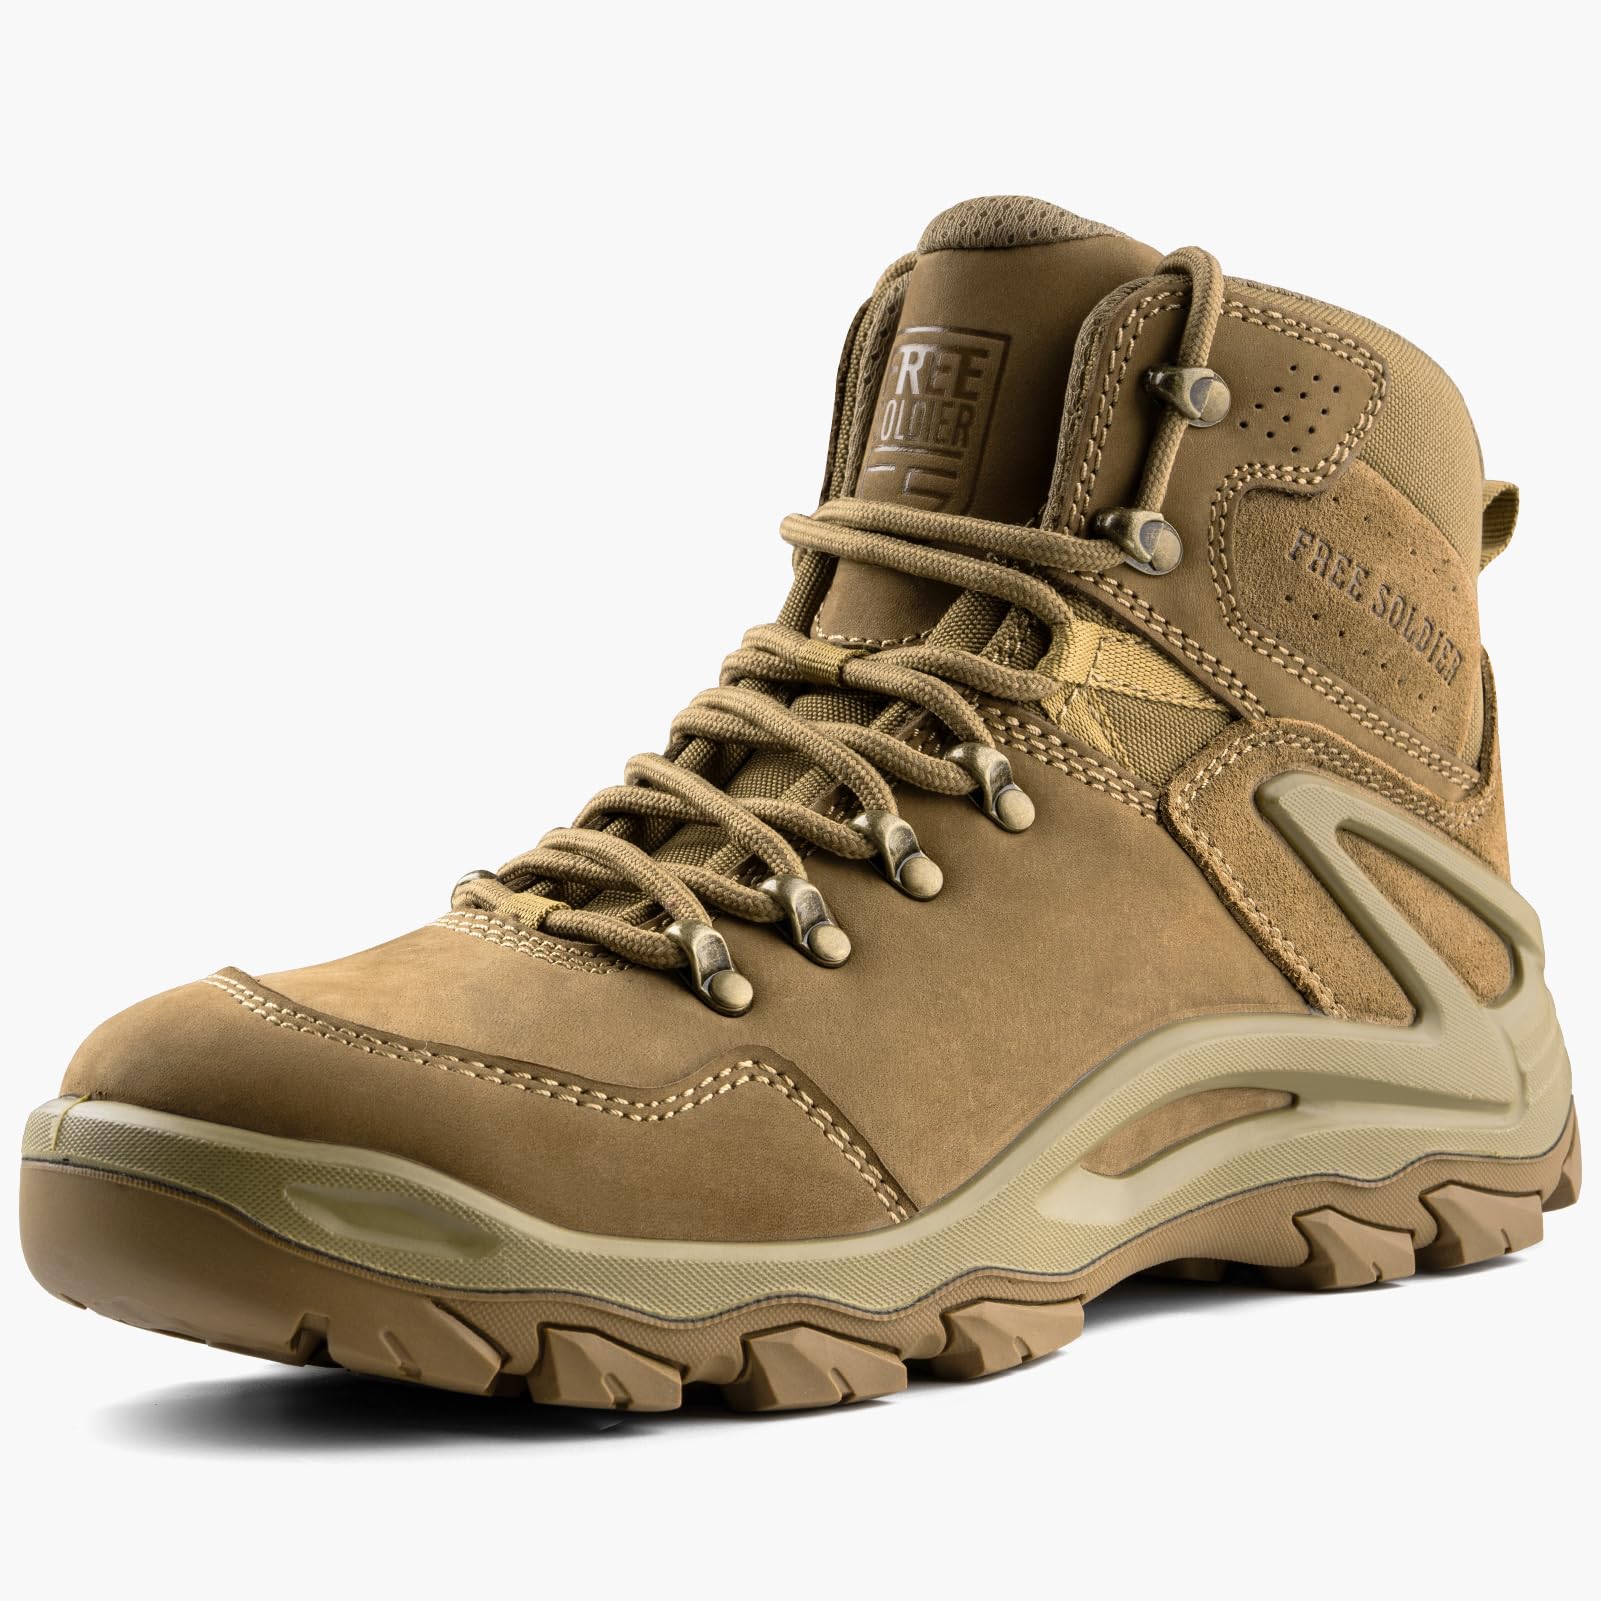 Waterproof Tactical Boots and Shoes - Lightweight, Durable & Non